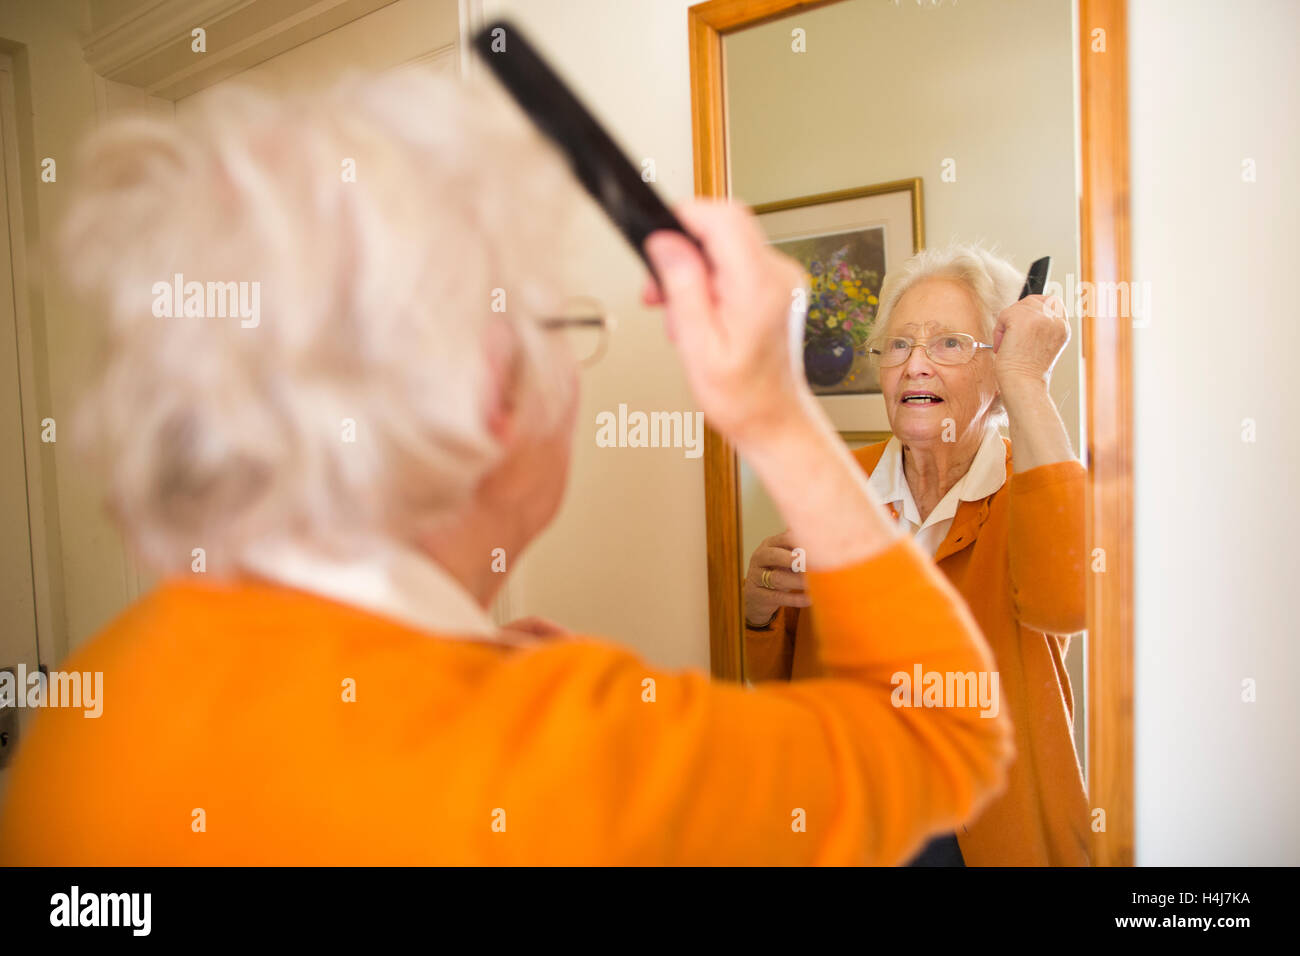 Elderly lady combing her hair in mirror at home, UK Stock Photo